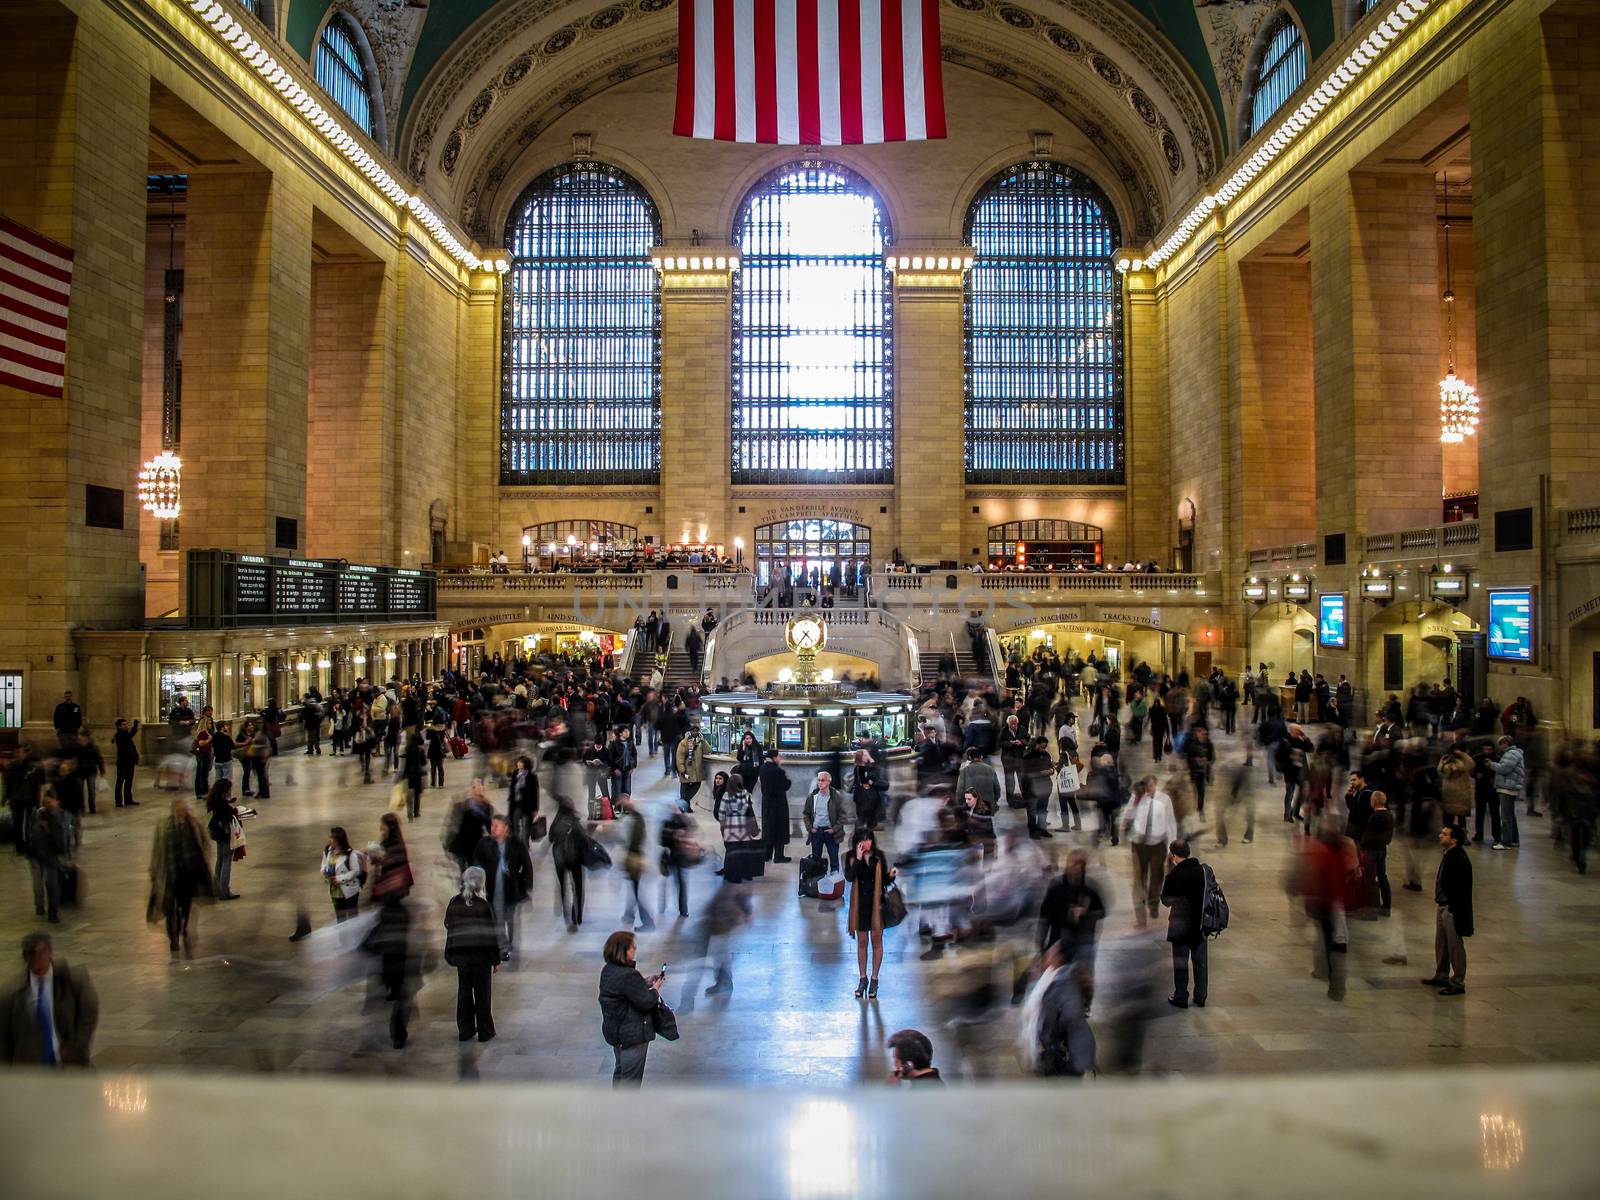 Inside Grand Central Station by samULvisuals